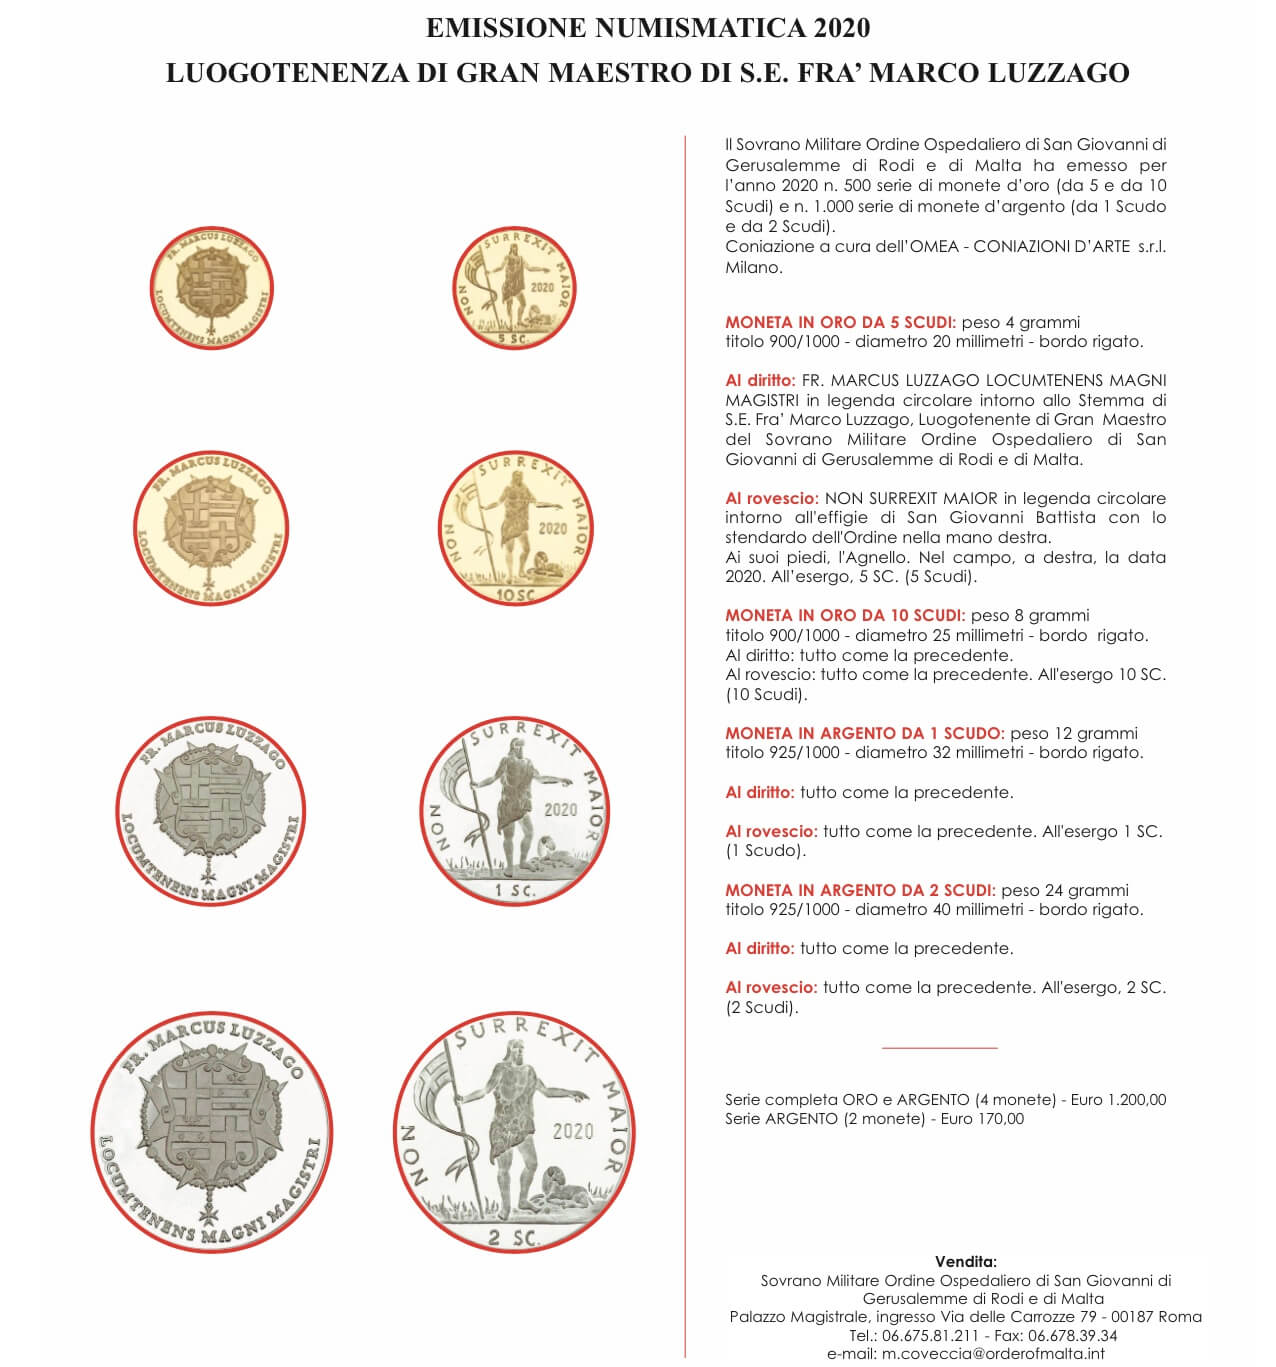 Gold and silver scudo coins, issued by the Sovereign Military Order of Malta. <br /> <i>Source: https://www.orderofmalta.int/</i>